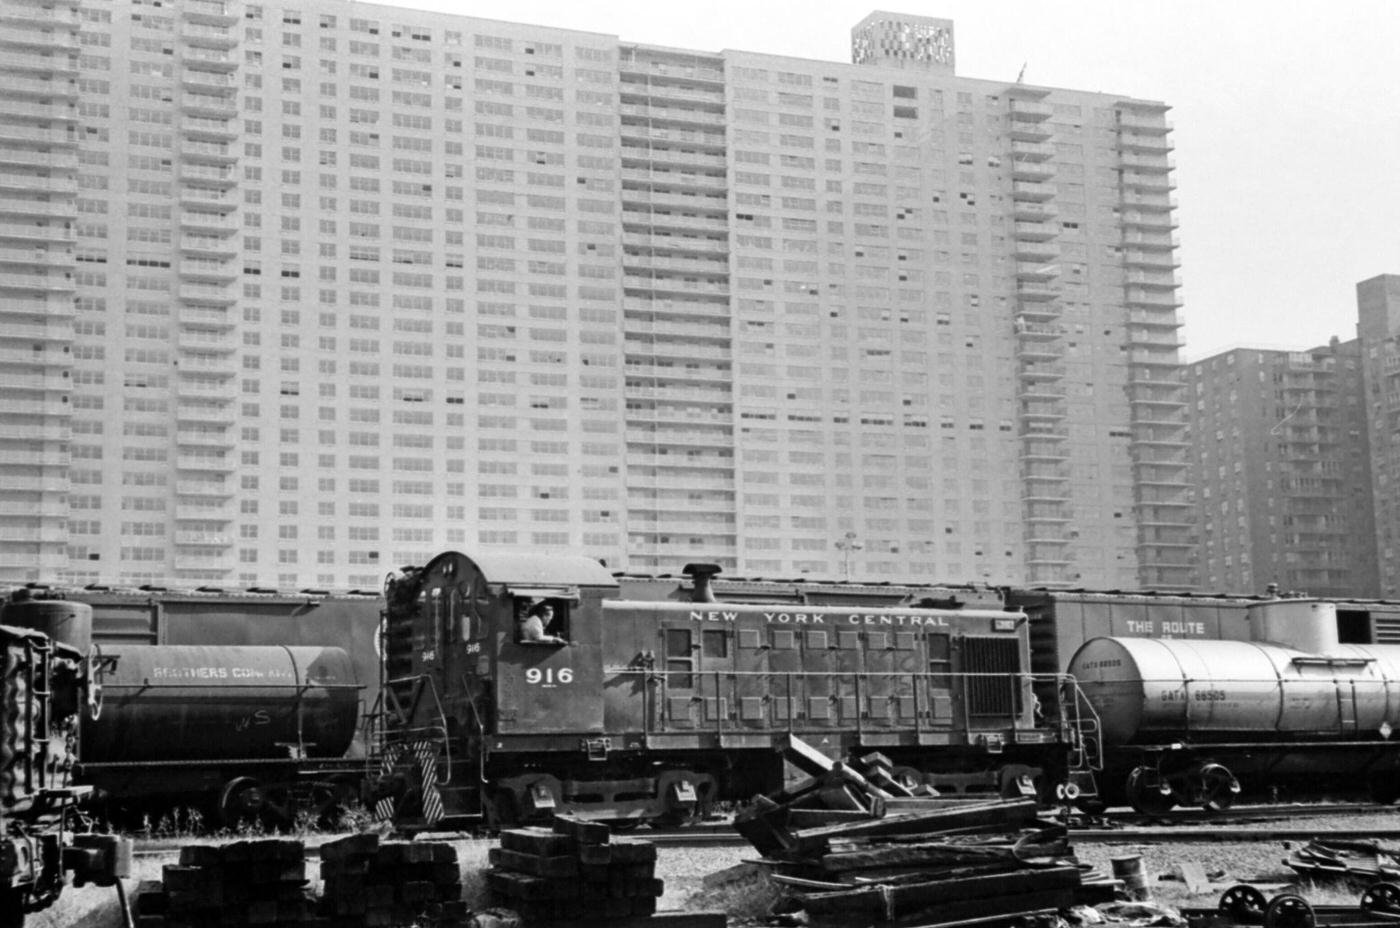 New York Central Rail Car And Other Box Cars In Upper Manhattan, 1965